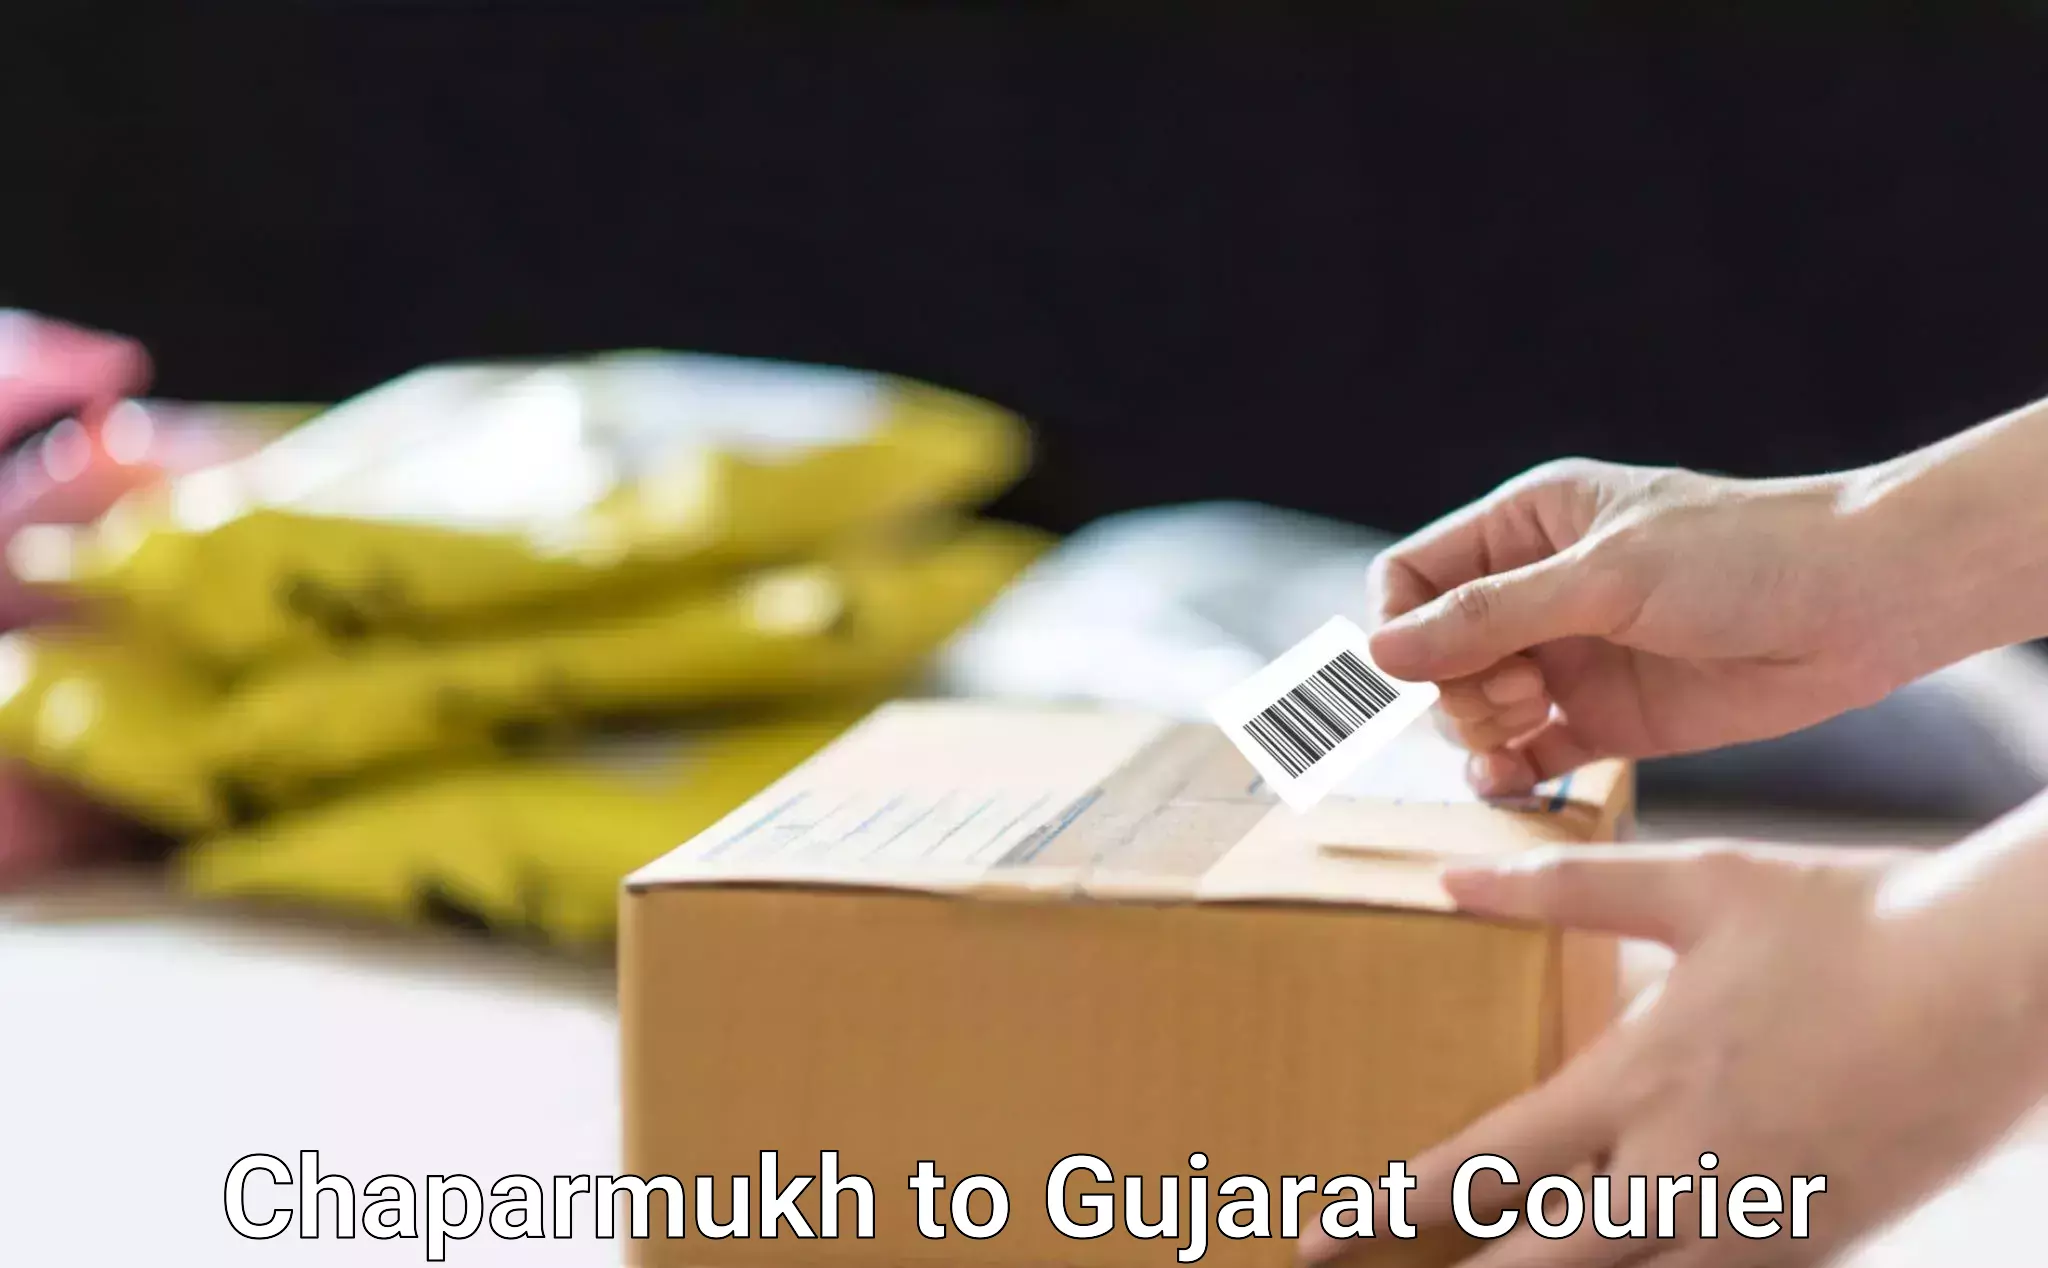 Customer-oriented courier services Chaparmukh to Modasa